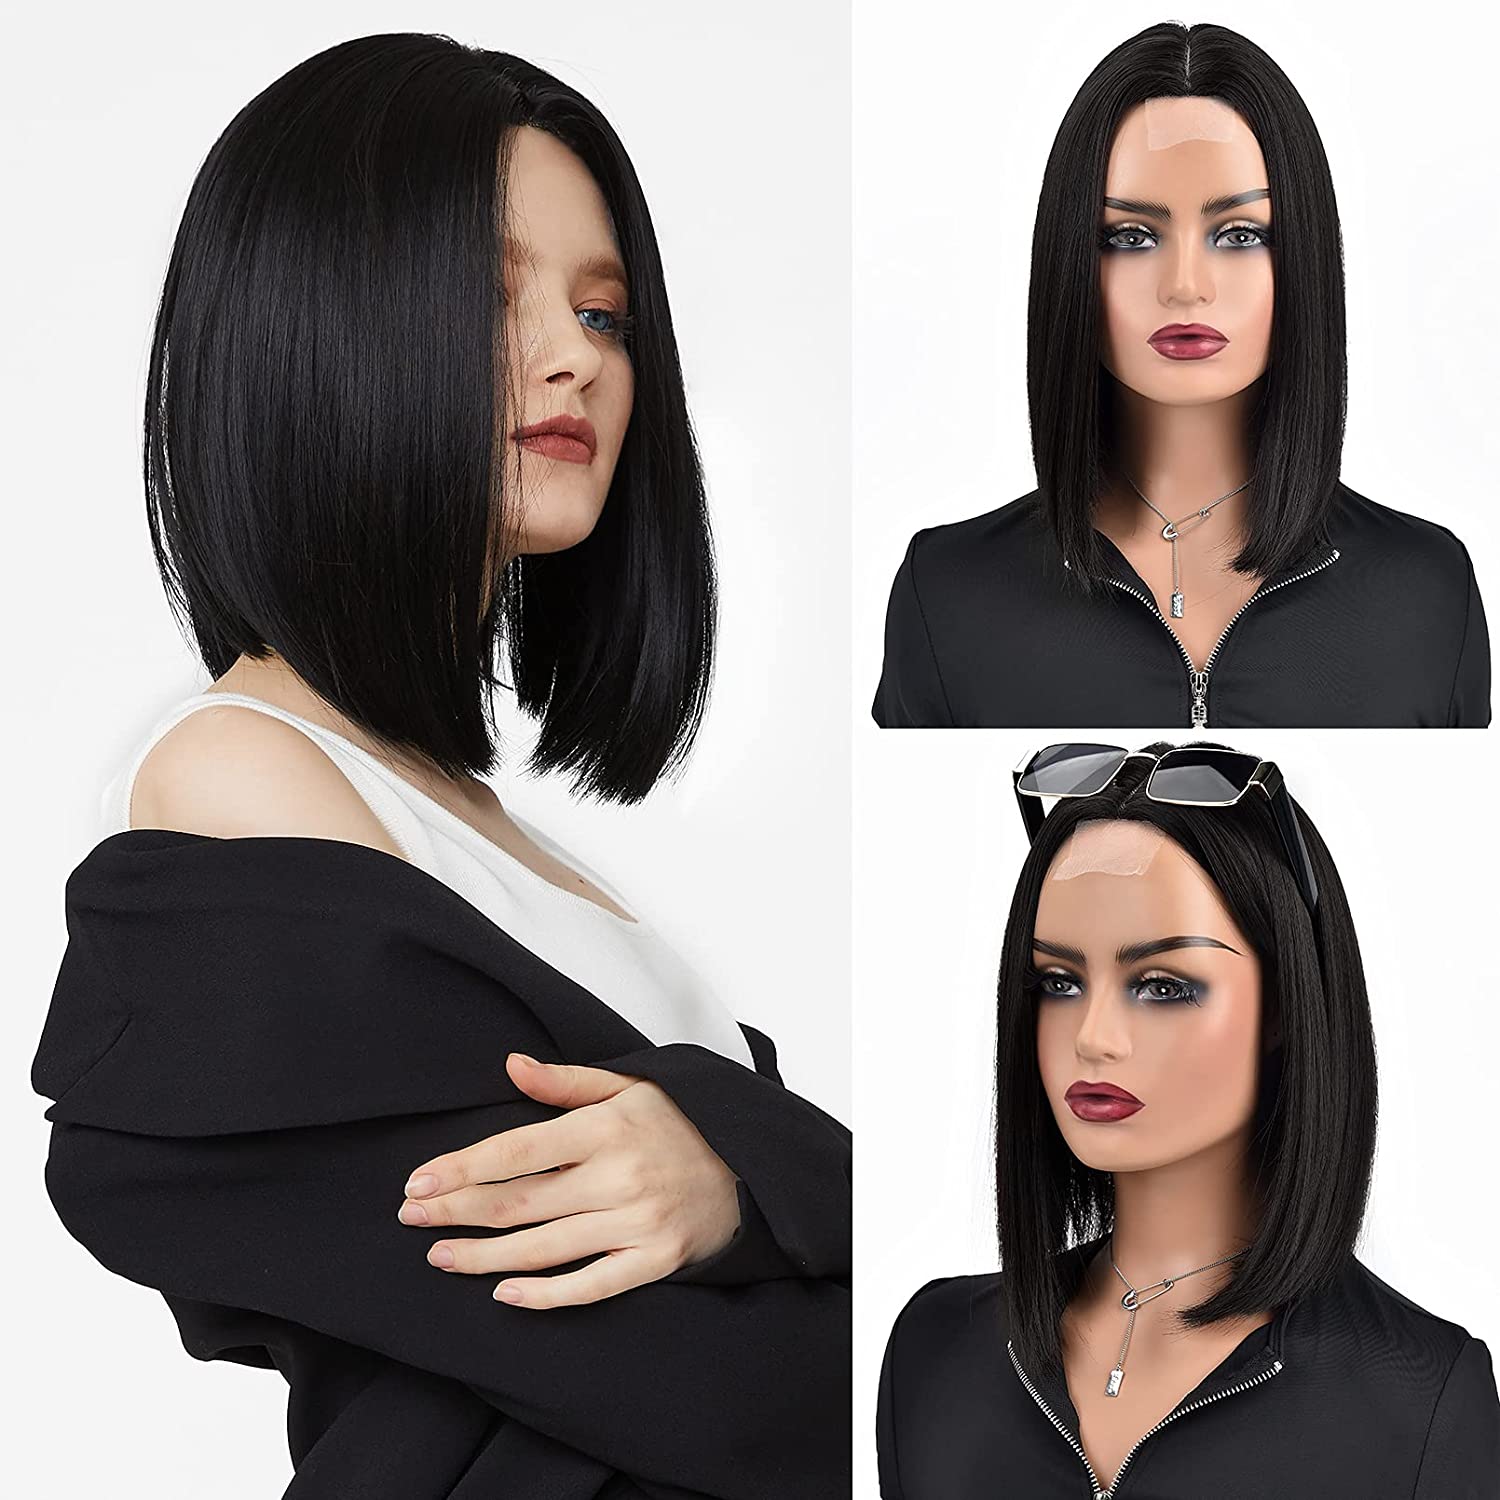 REECHO Synthetic Short Bob Wigs, Straight wigs Natural hairline Closure Wigs Pre Plucked with Natural Baby Hair